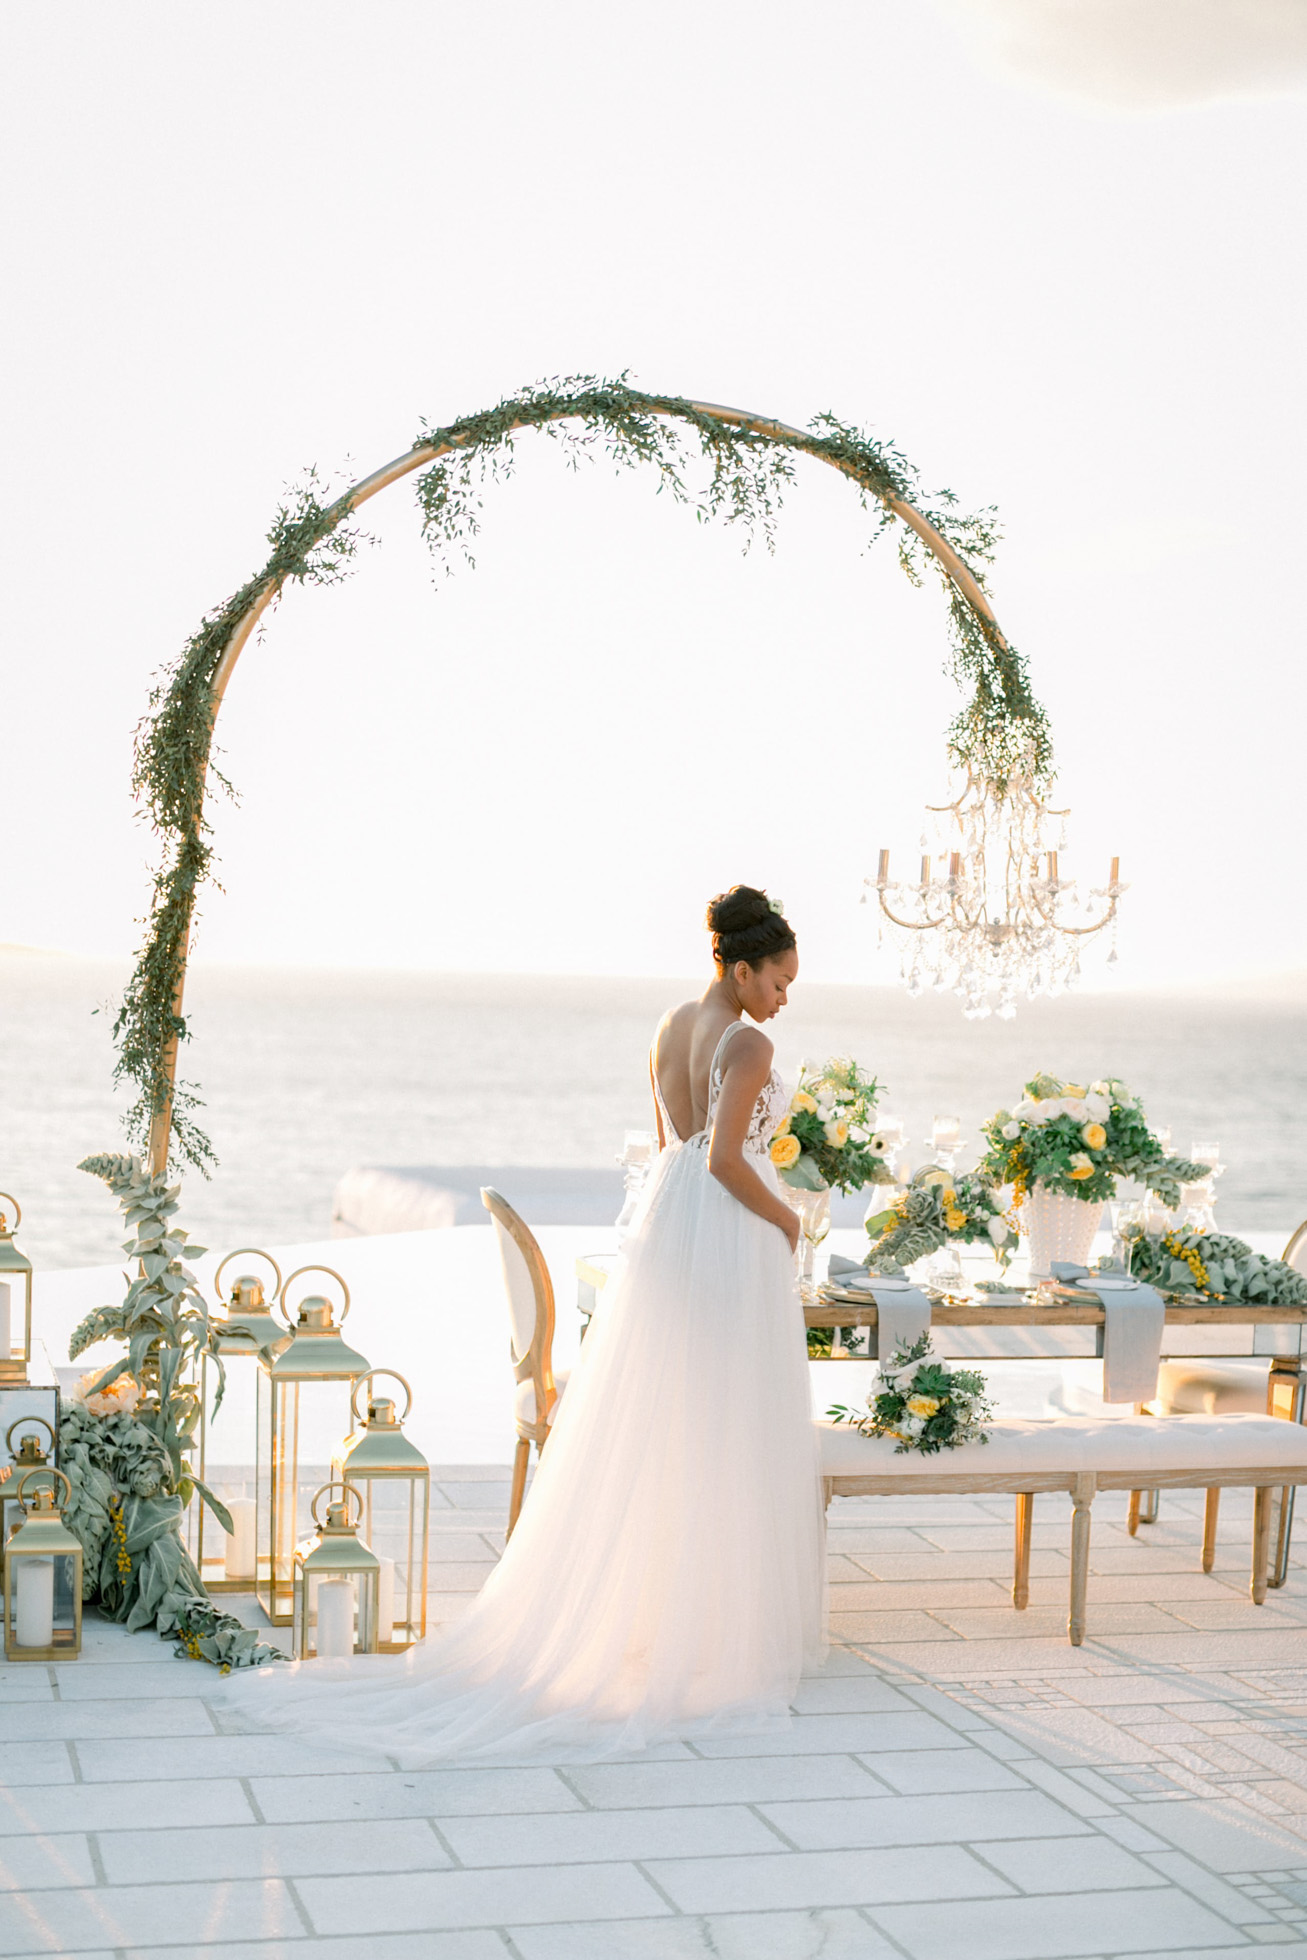 Luxury wedding reception and dinner setup with a bride by DeplanV for a white villa wedding inspiration session in Loyal Villas Luxury, Mykonos, Greece.